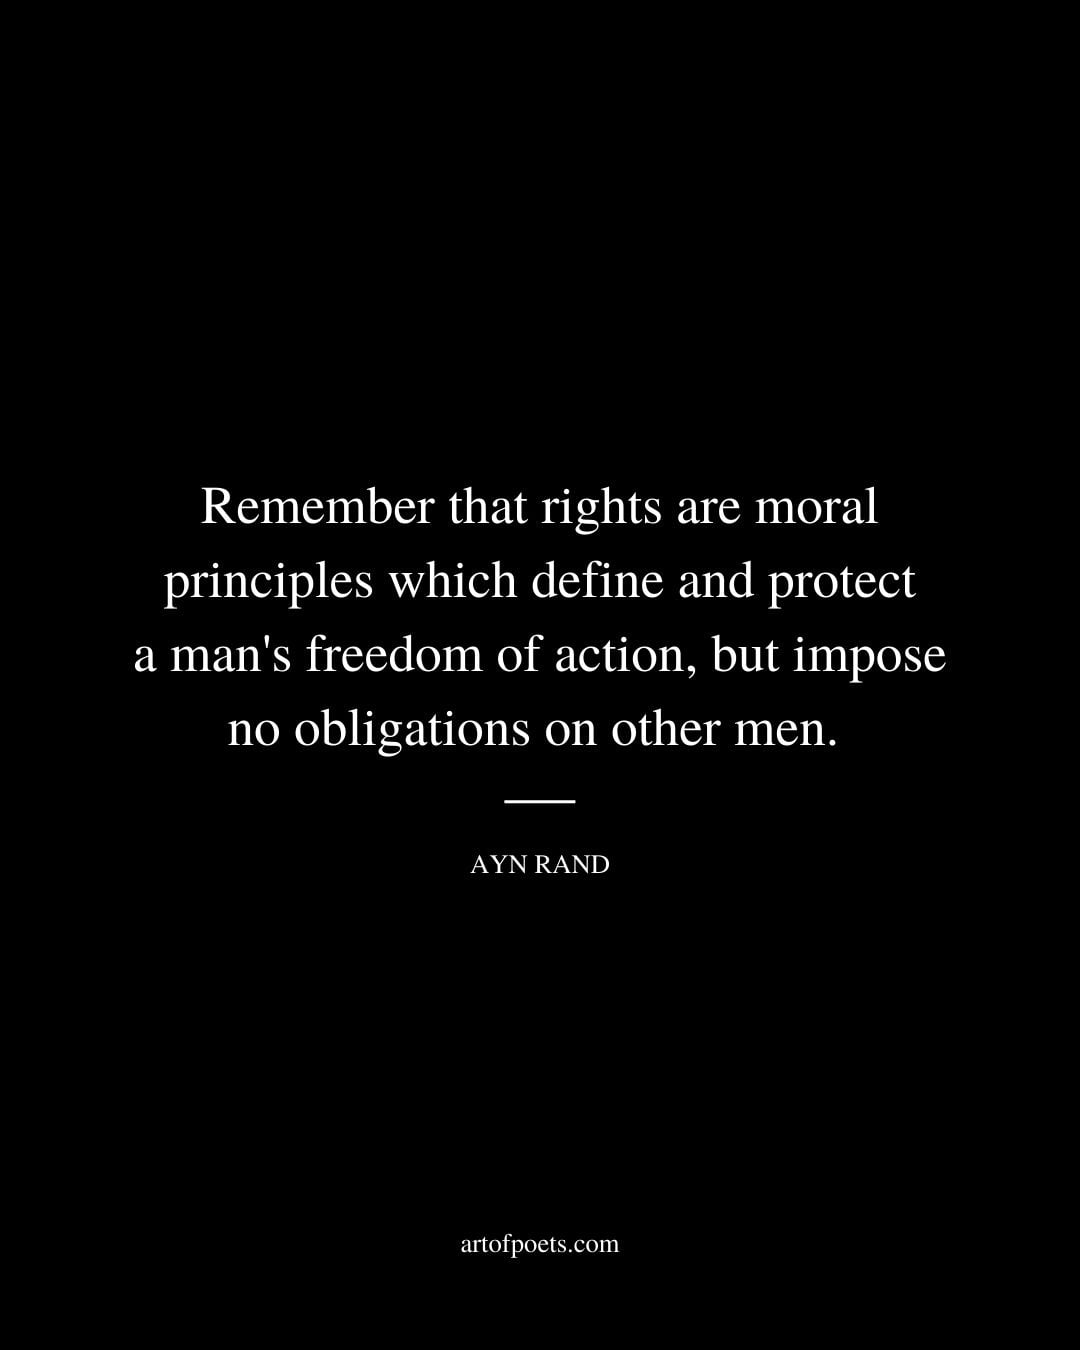 Remember that rights are moral principles which define and protect a mans freedom of action but impose no obligations on other men